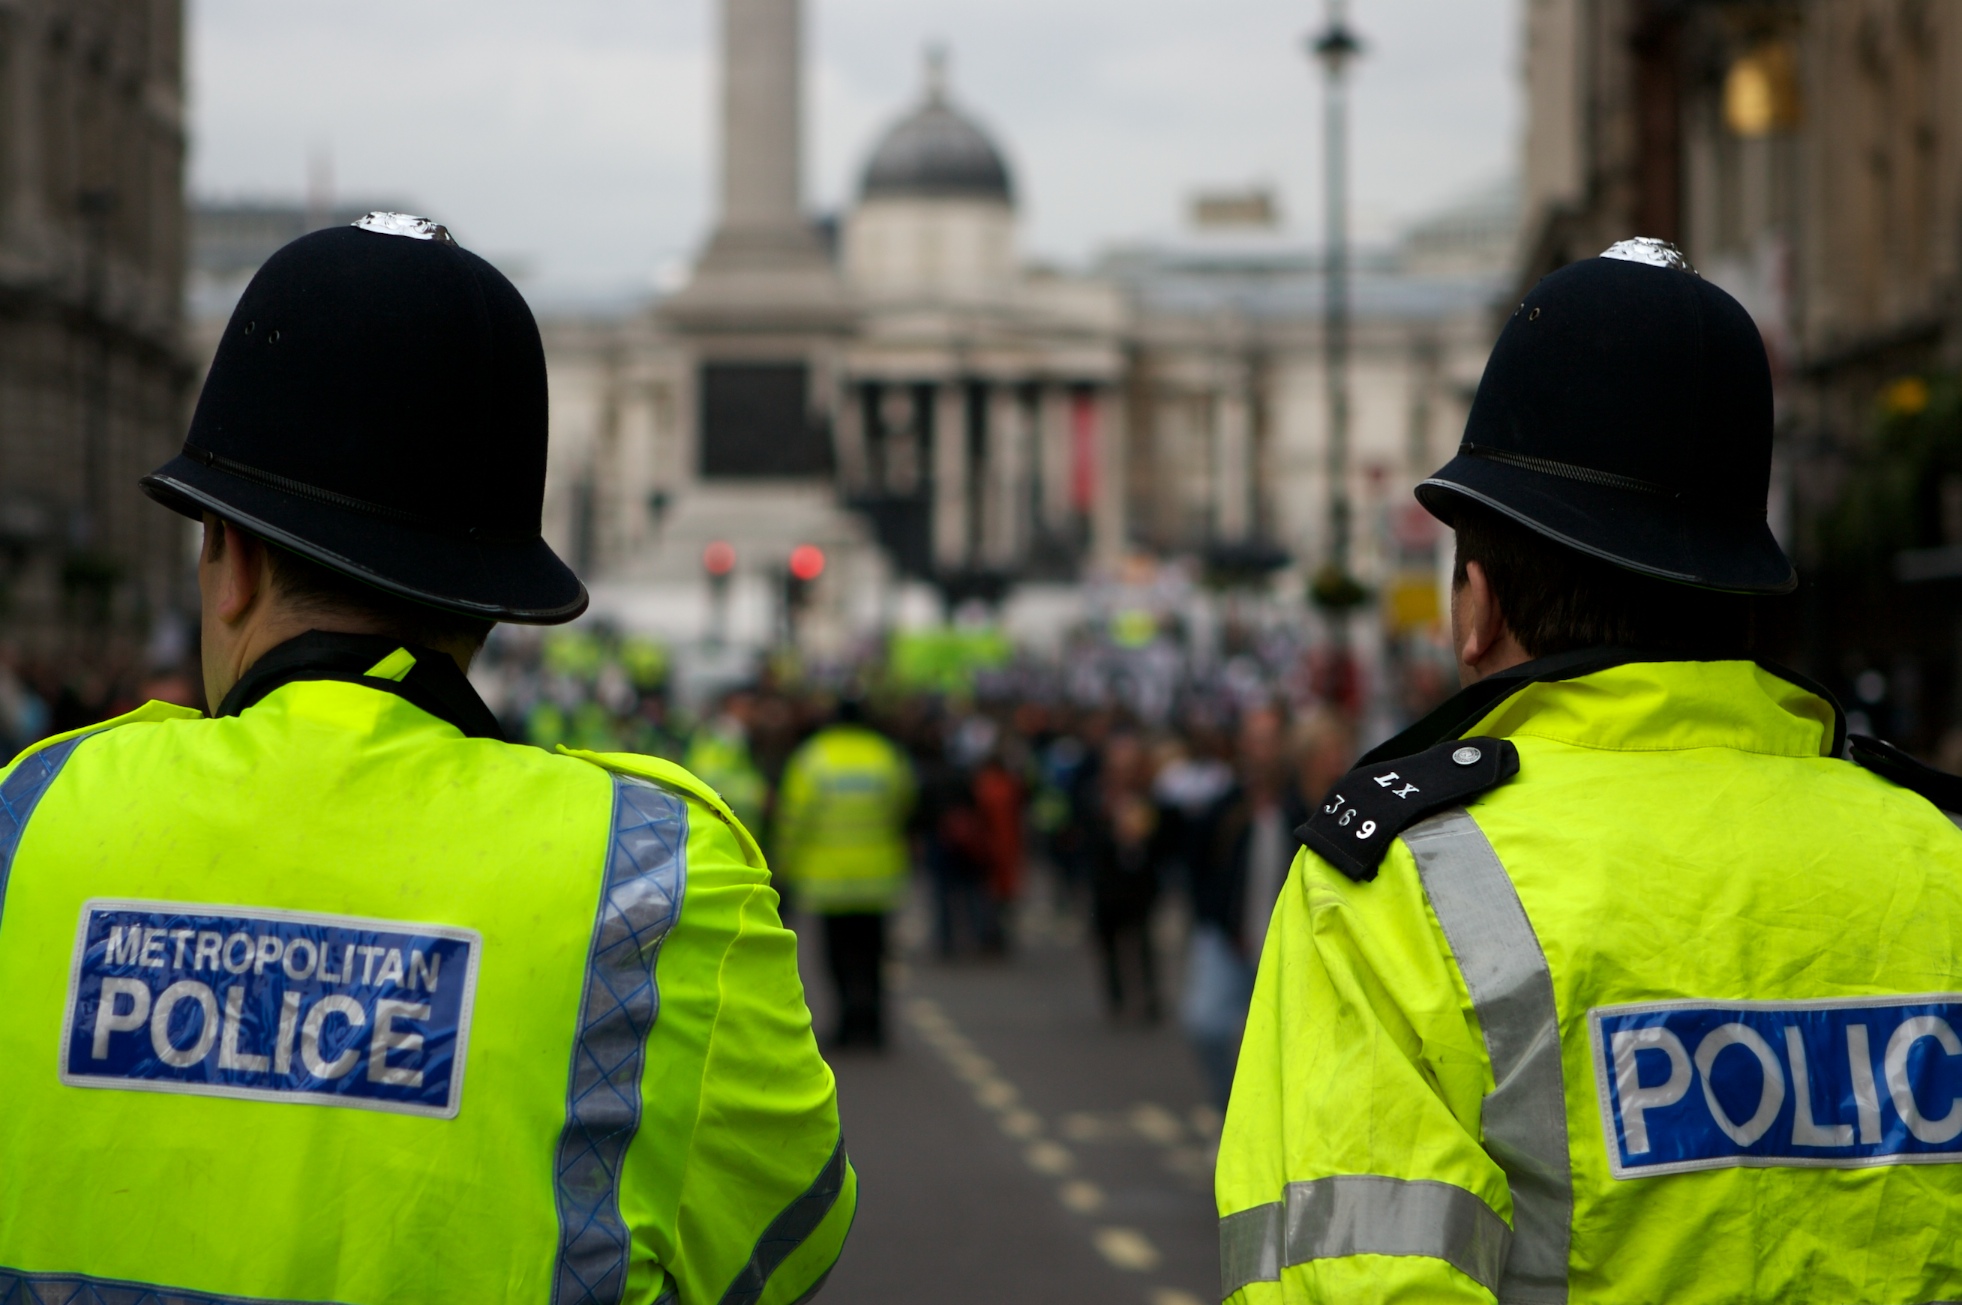 Police powers to stop and search: your rights